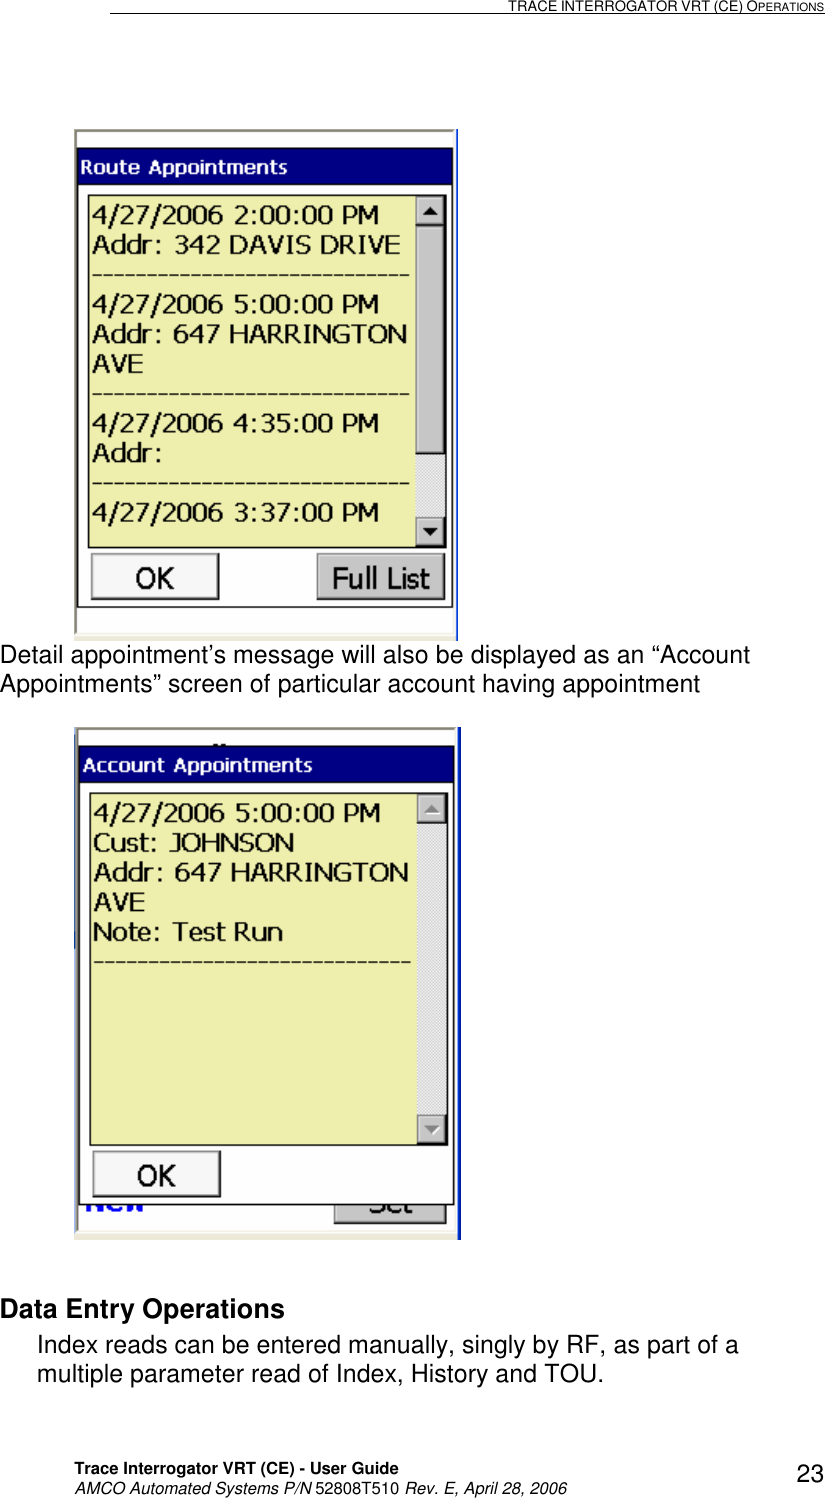                                                                                                                              TRACE INTERROGATOR VRT (CE) OPERATIONS    Trace Interrogator VRT (CE) - User Guide   AMCO Automated Systems P/N 52808T510 Rev. E, April 28, 2006 23    Detail appointment’s message will also be displayed as an “Account Appointments” screen of particular account having appointment     Data Entry Operations Index reads can be entered manually, singly by RF, as part of a multiple parameter read of Index, History and TOU.    